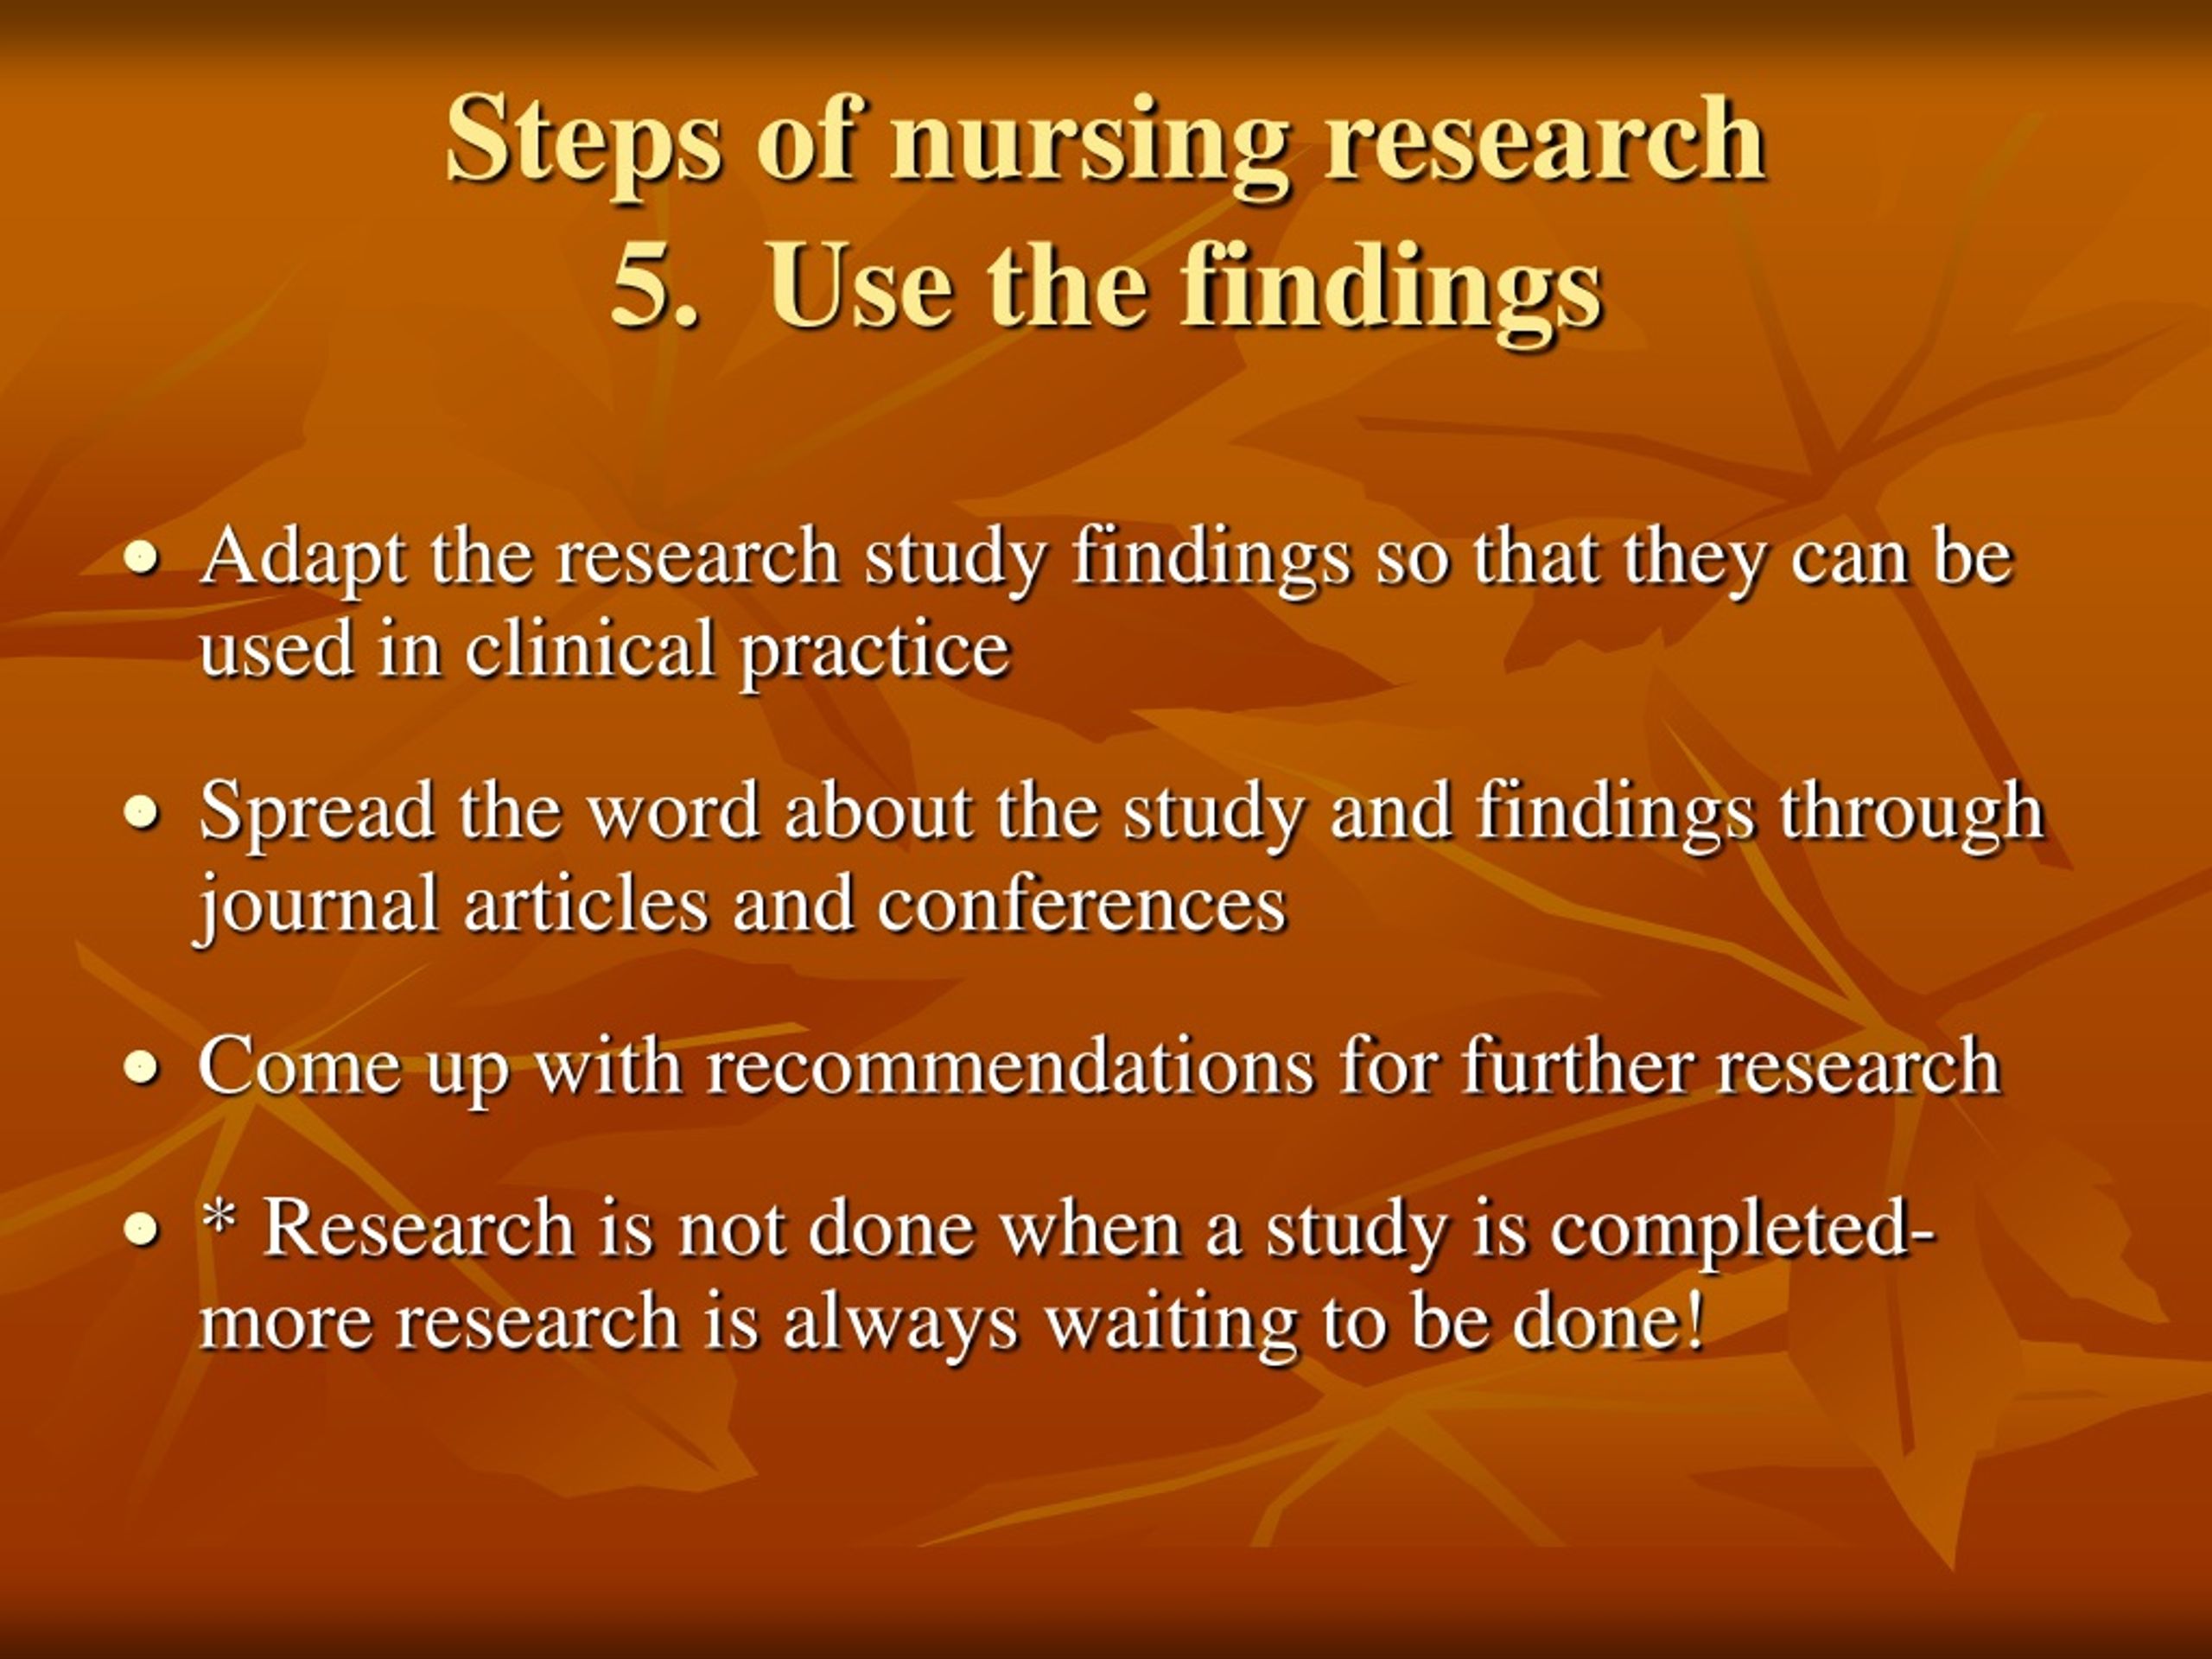 importance of research findings in nursing